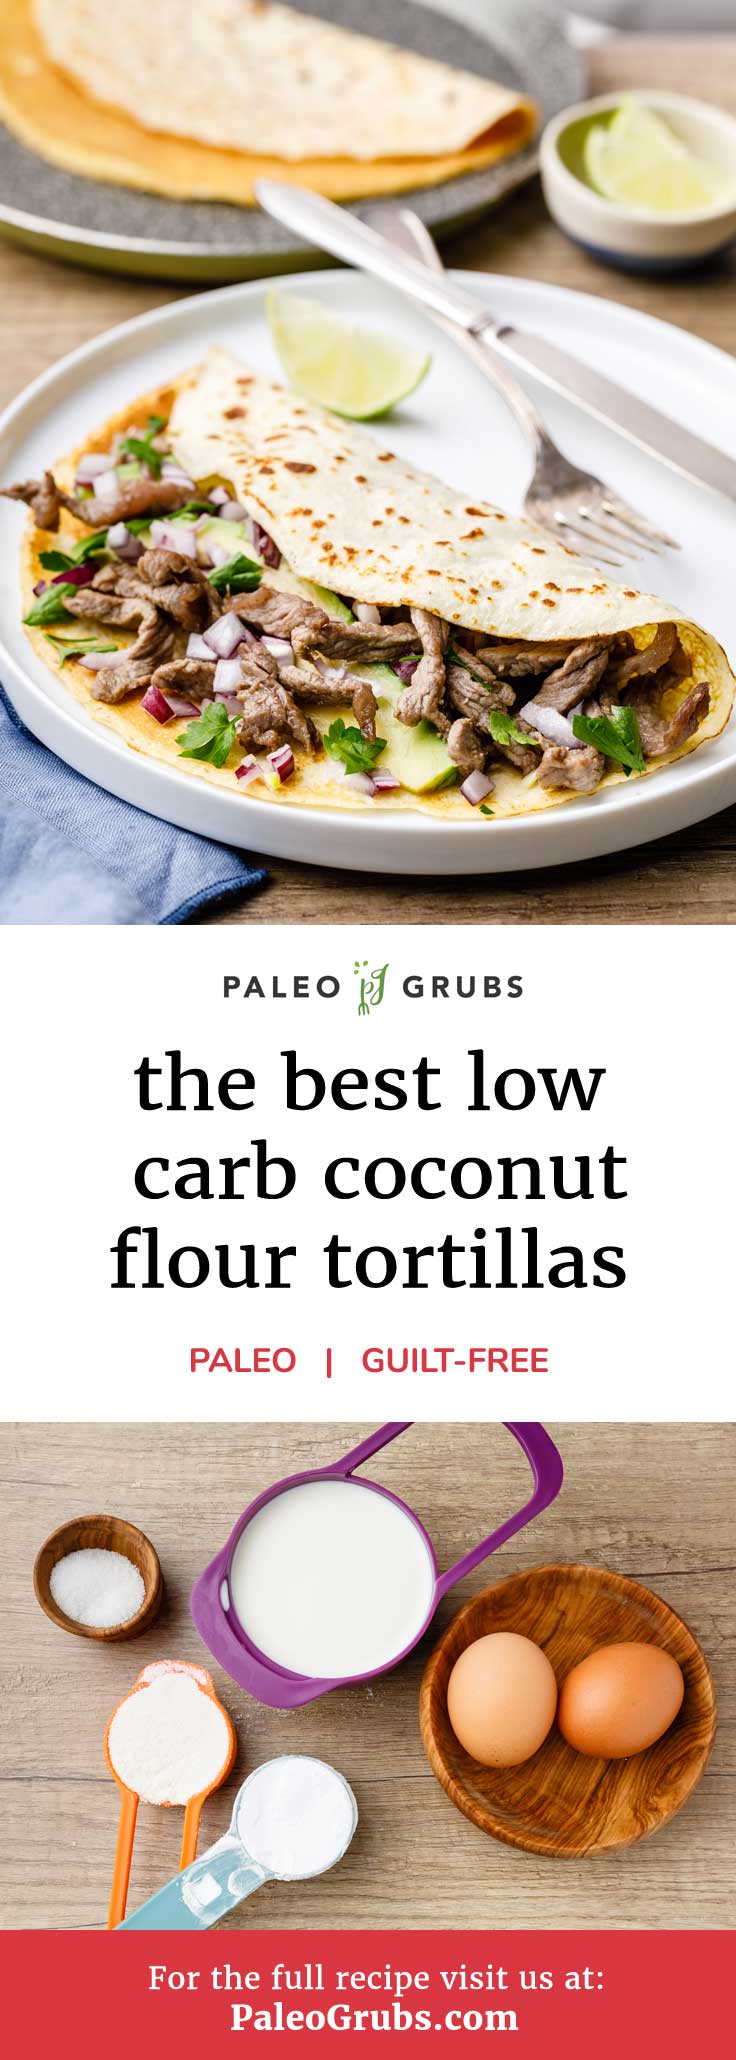 There are so many delicious Mexican inspired meals that you can make with tortillas. Some of my favorite paleo recipes are for things like fajitas, enchiladas, and tacos. And there’s no better tortilla than a tasty homemade tortilla. With that in mind, I’m pleased to share my new favorite paleo recipe--the best low carb coconut flour tortillas that you will ever try.